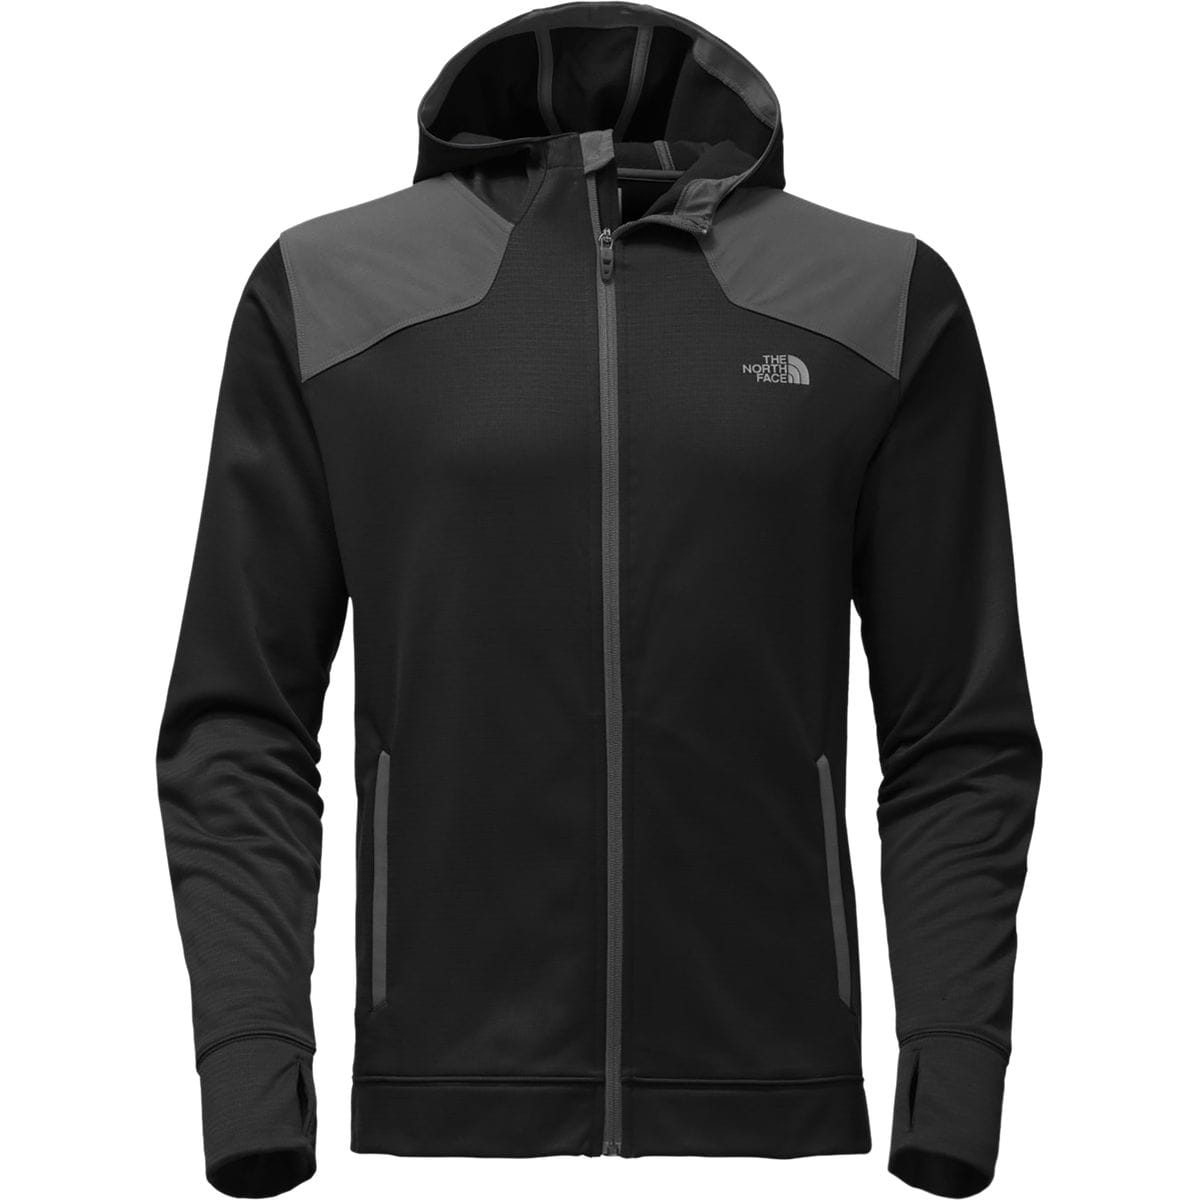 The North Face Ampere Full-Zip Hoodie - Men's - Clothing